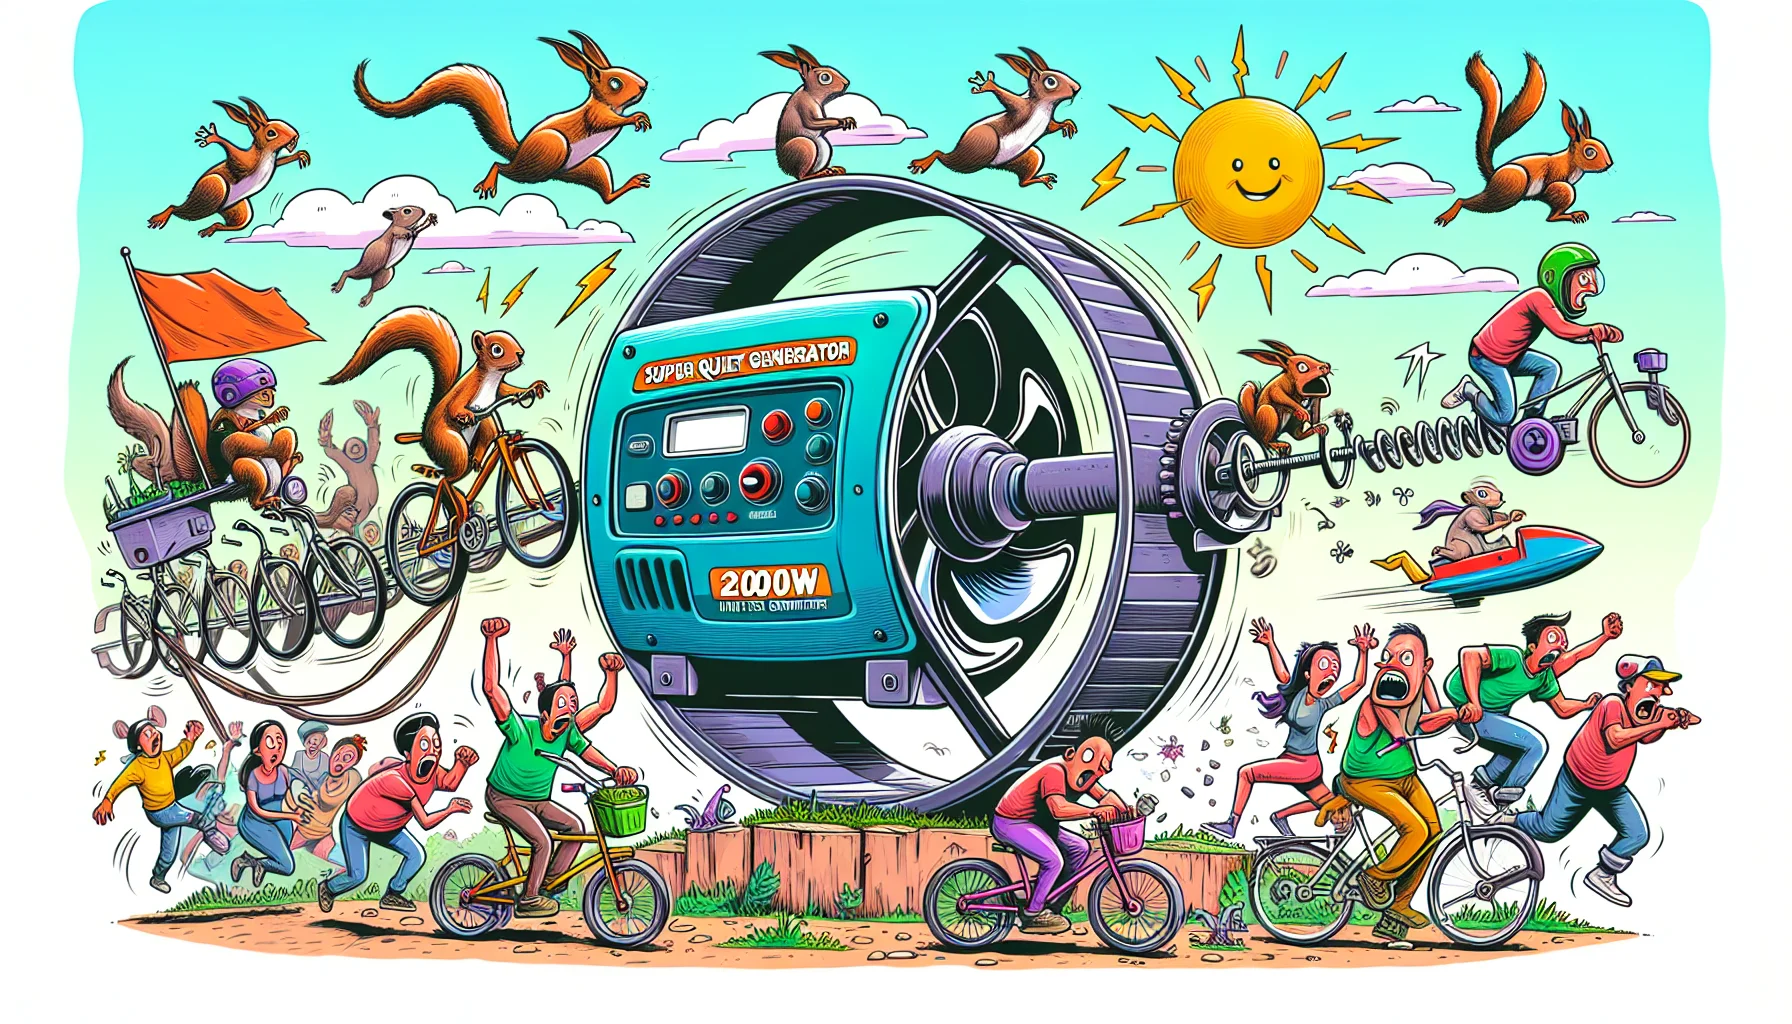 Depict a humorous situation where a nondescript 2000W super quiet inverter generator is being used in unconventional ways to generate electricity. Maybe it's being turned by a group of squirrels running on a giant wheel, or being pedaled by a team of aliens. People around are entertained, showing expressions of surprise and amusement. Include some popping colors, to make the scene captivating and enticing.